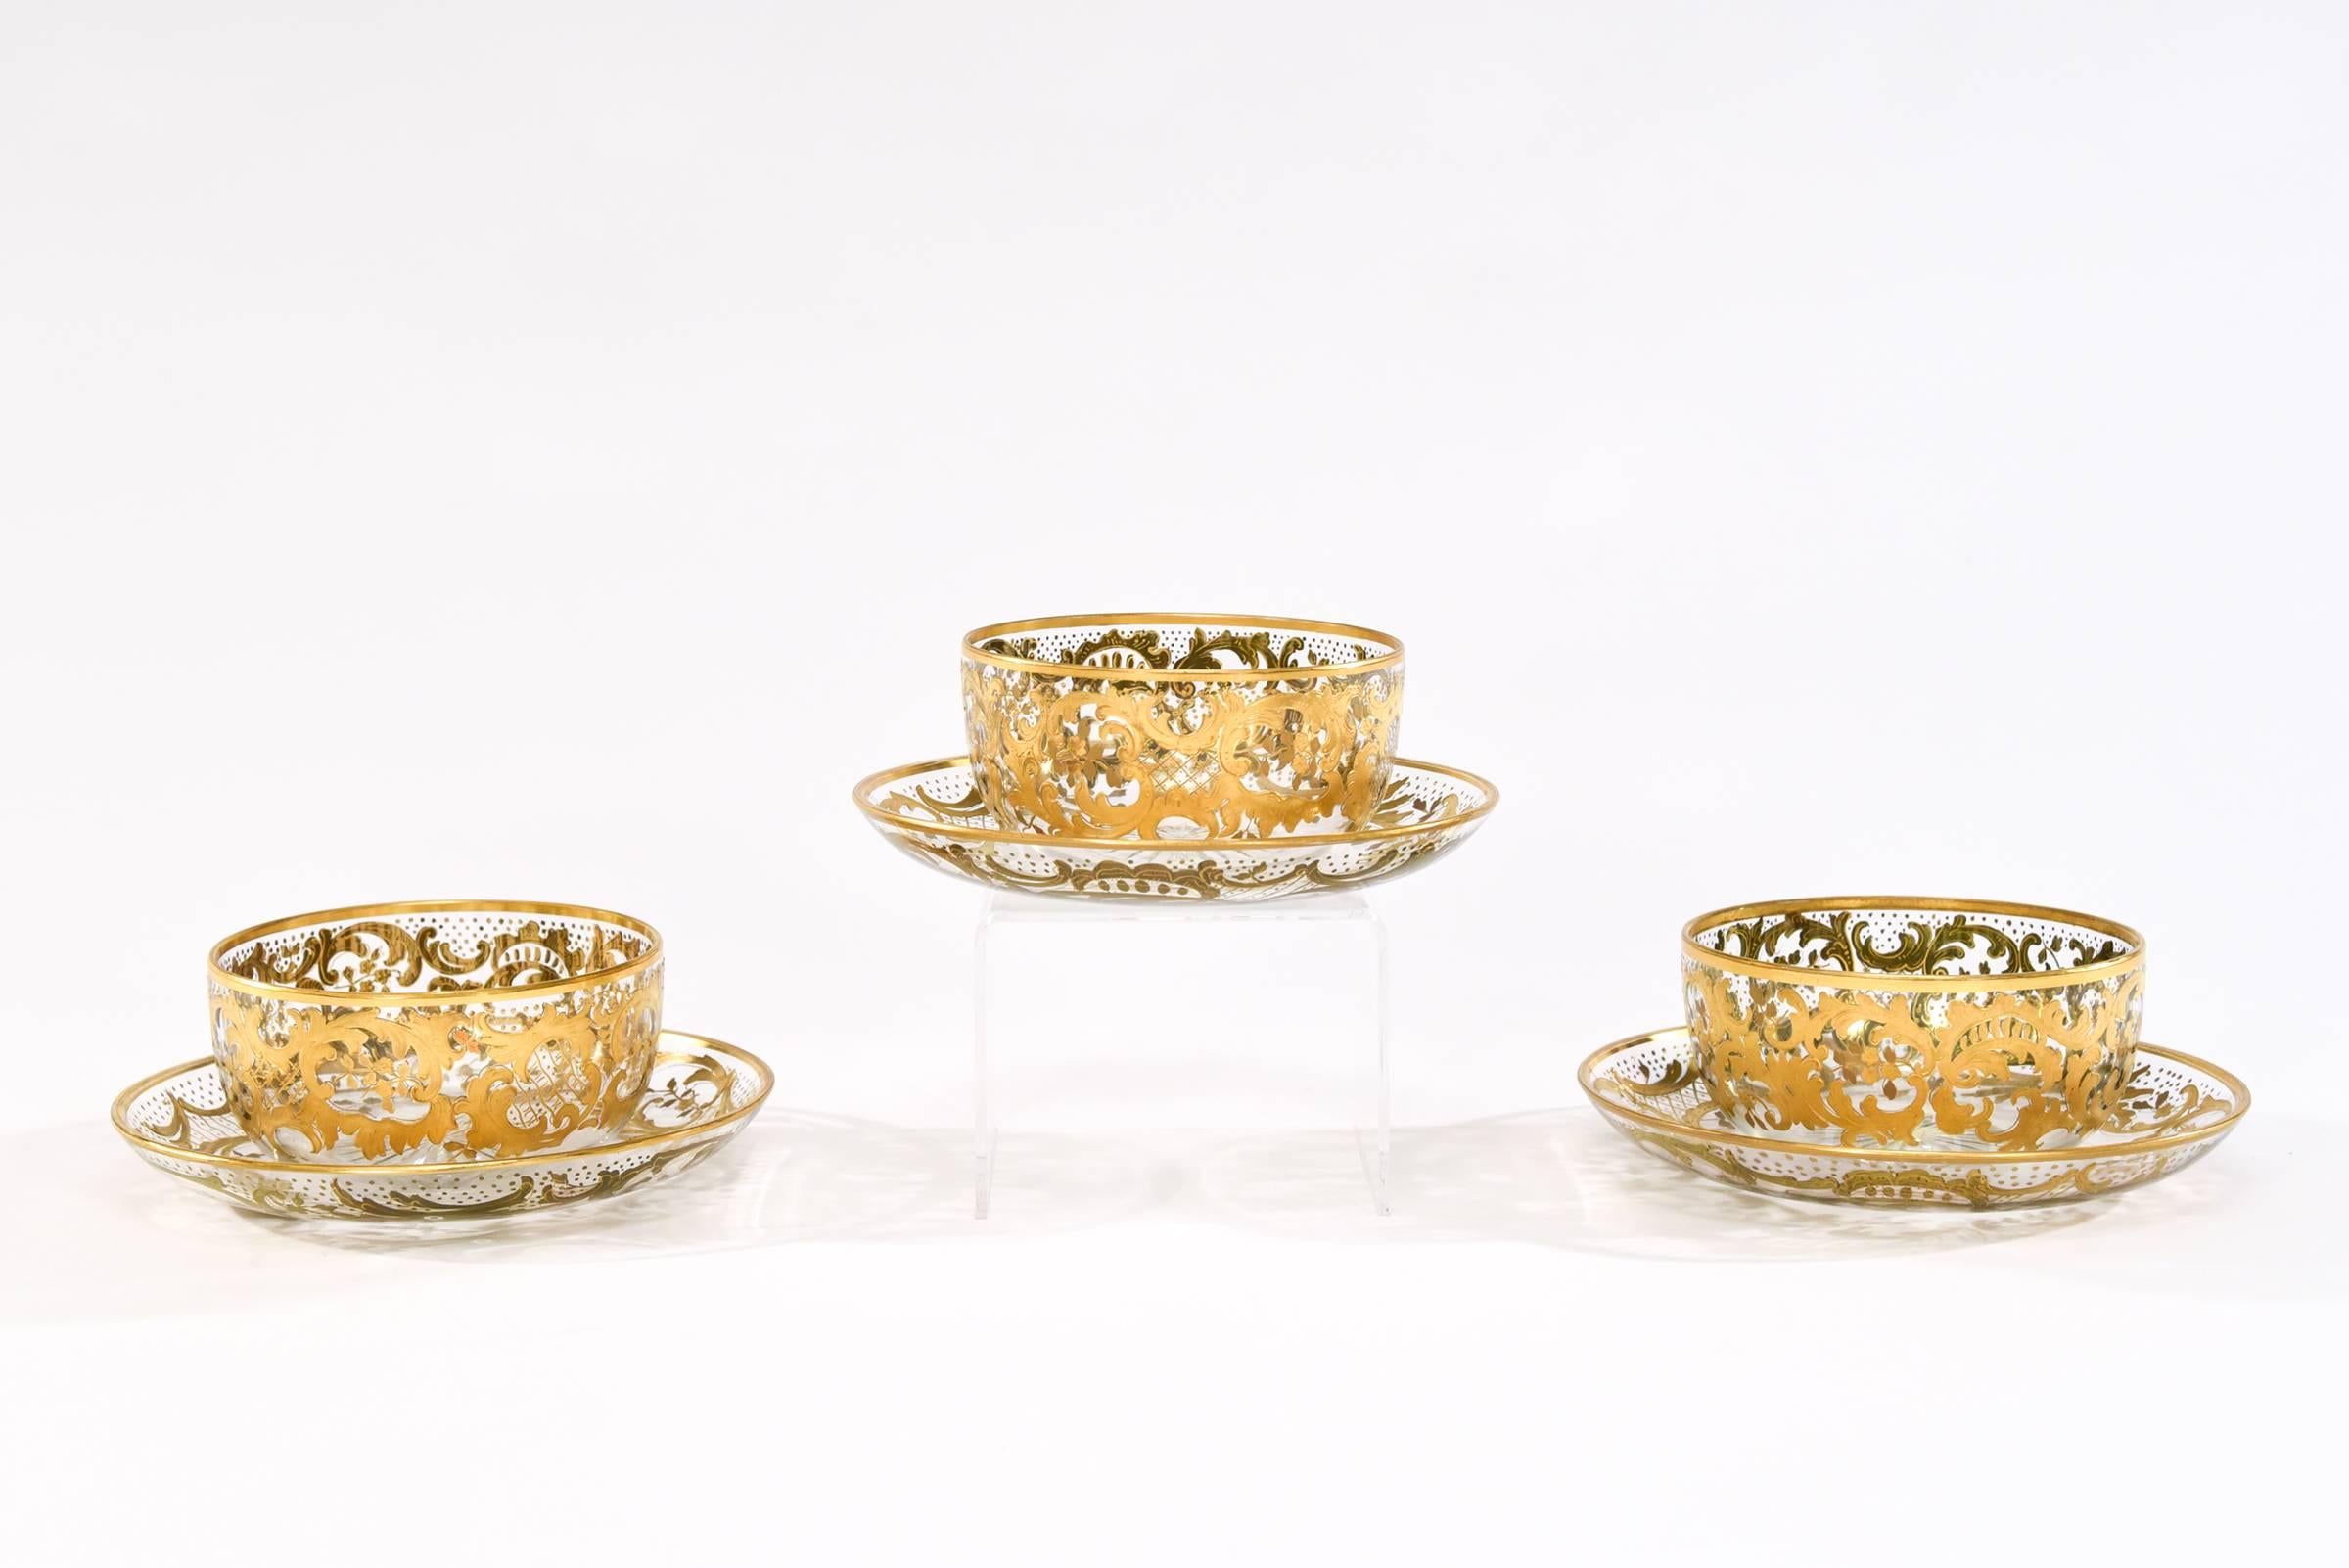 Finnish Set of 12 Baccarat Handblown Crystal Bowls & Underplates with Raised Paste Gold